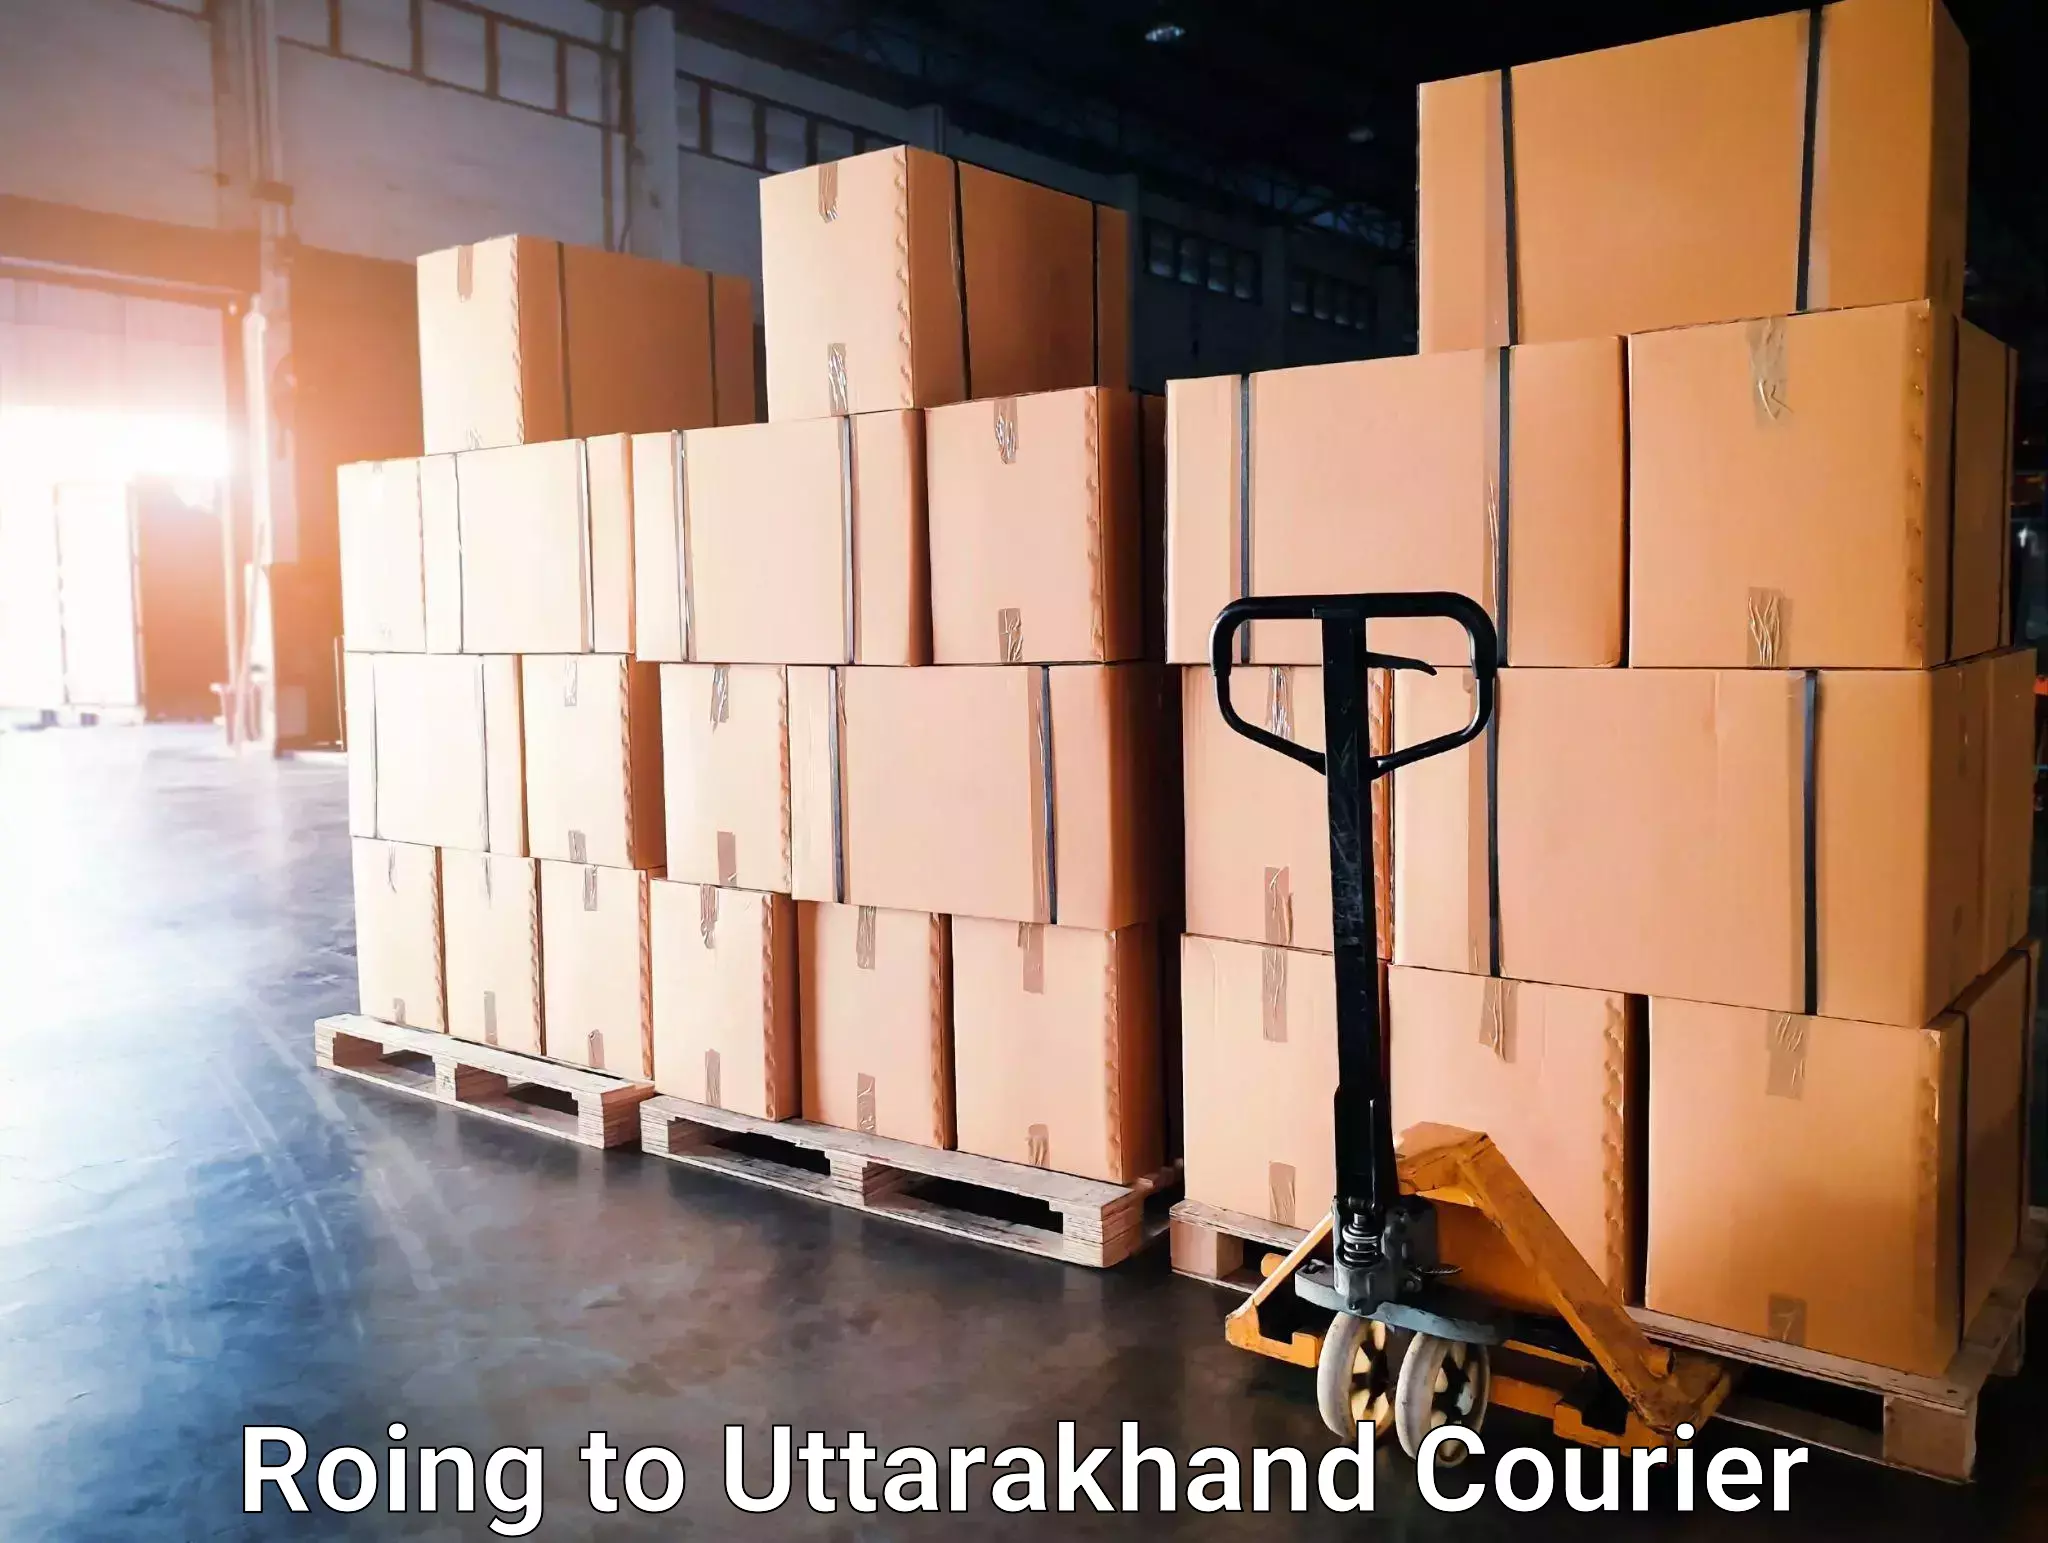 Courier service innovation Roing to Dwarahat